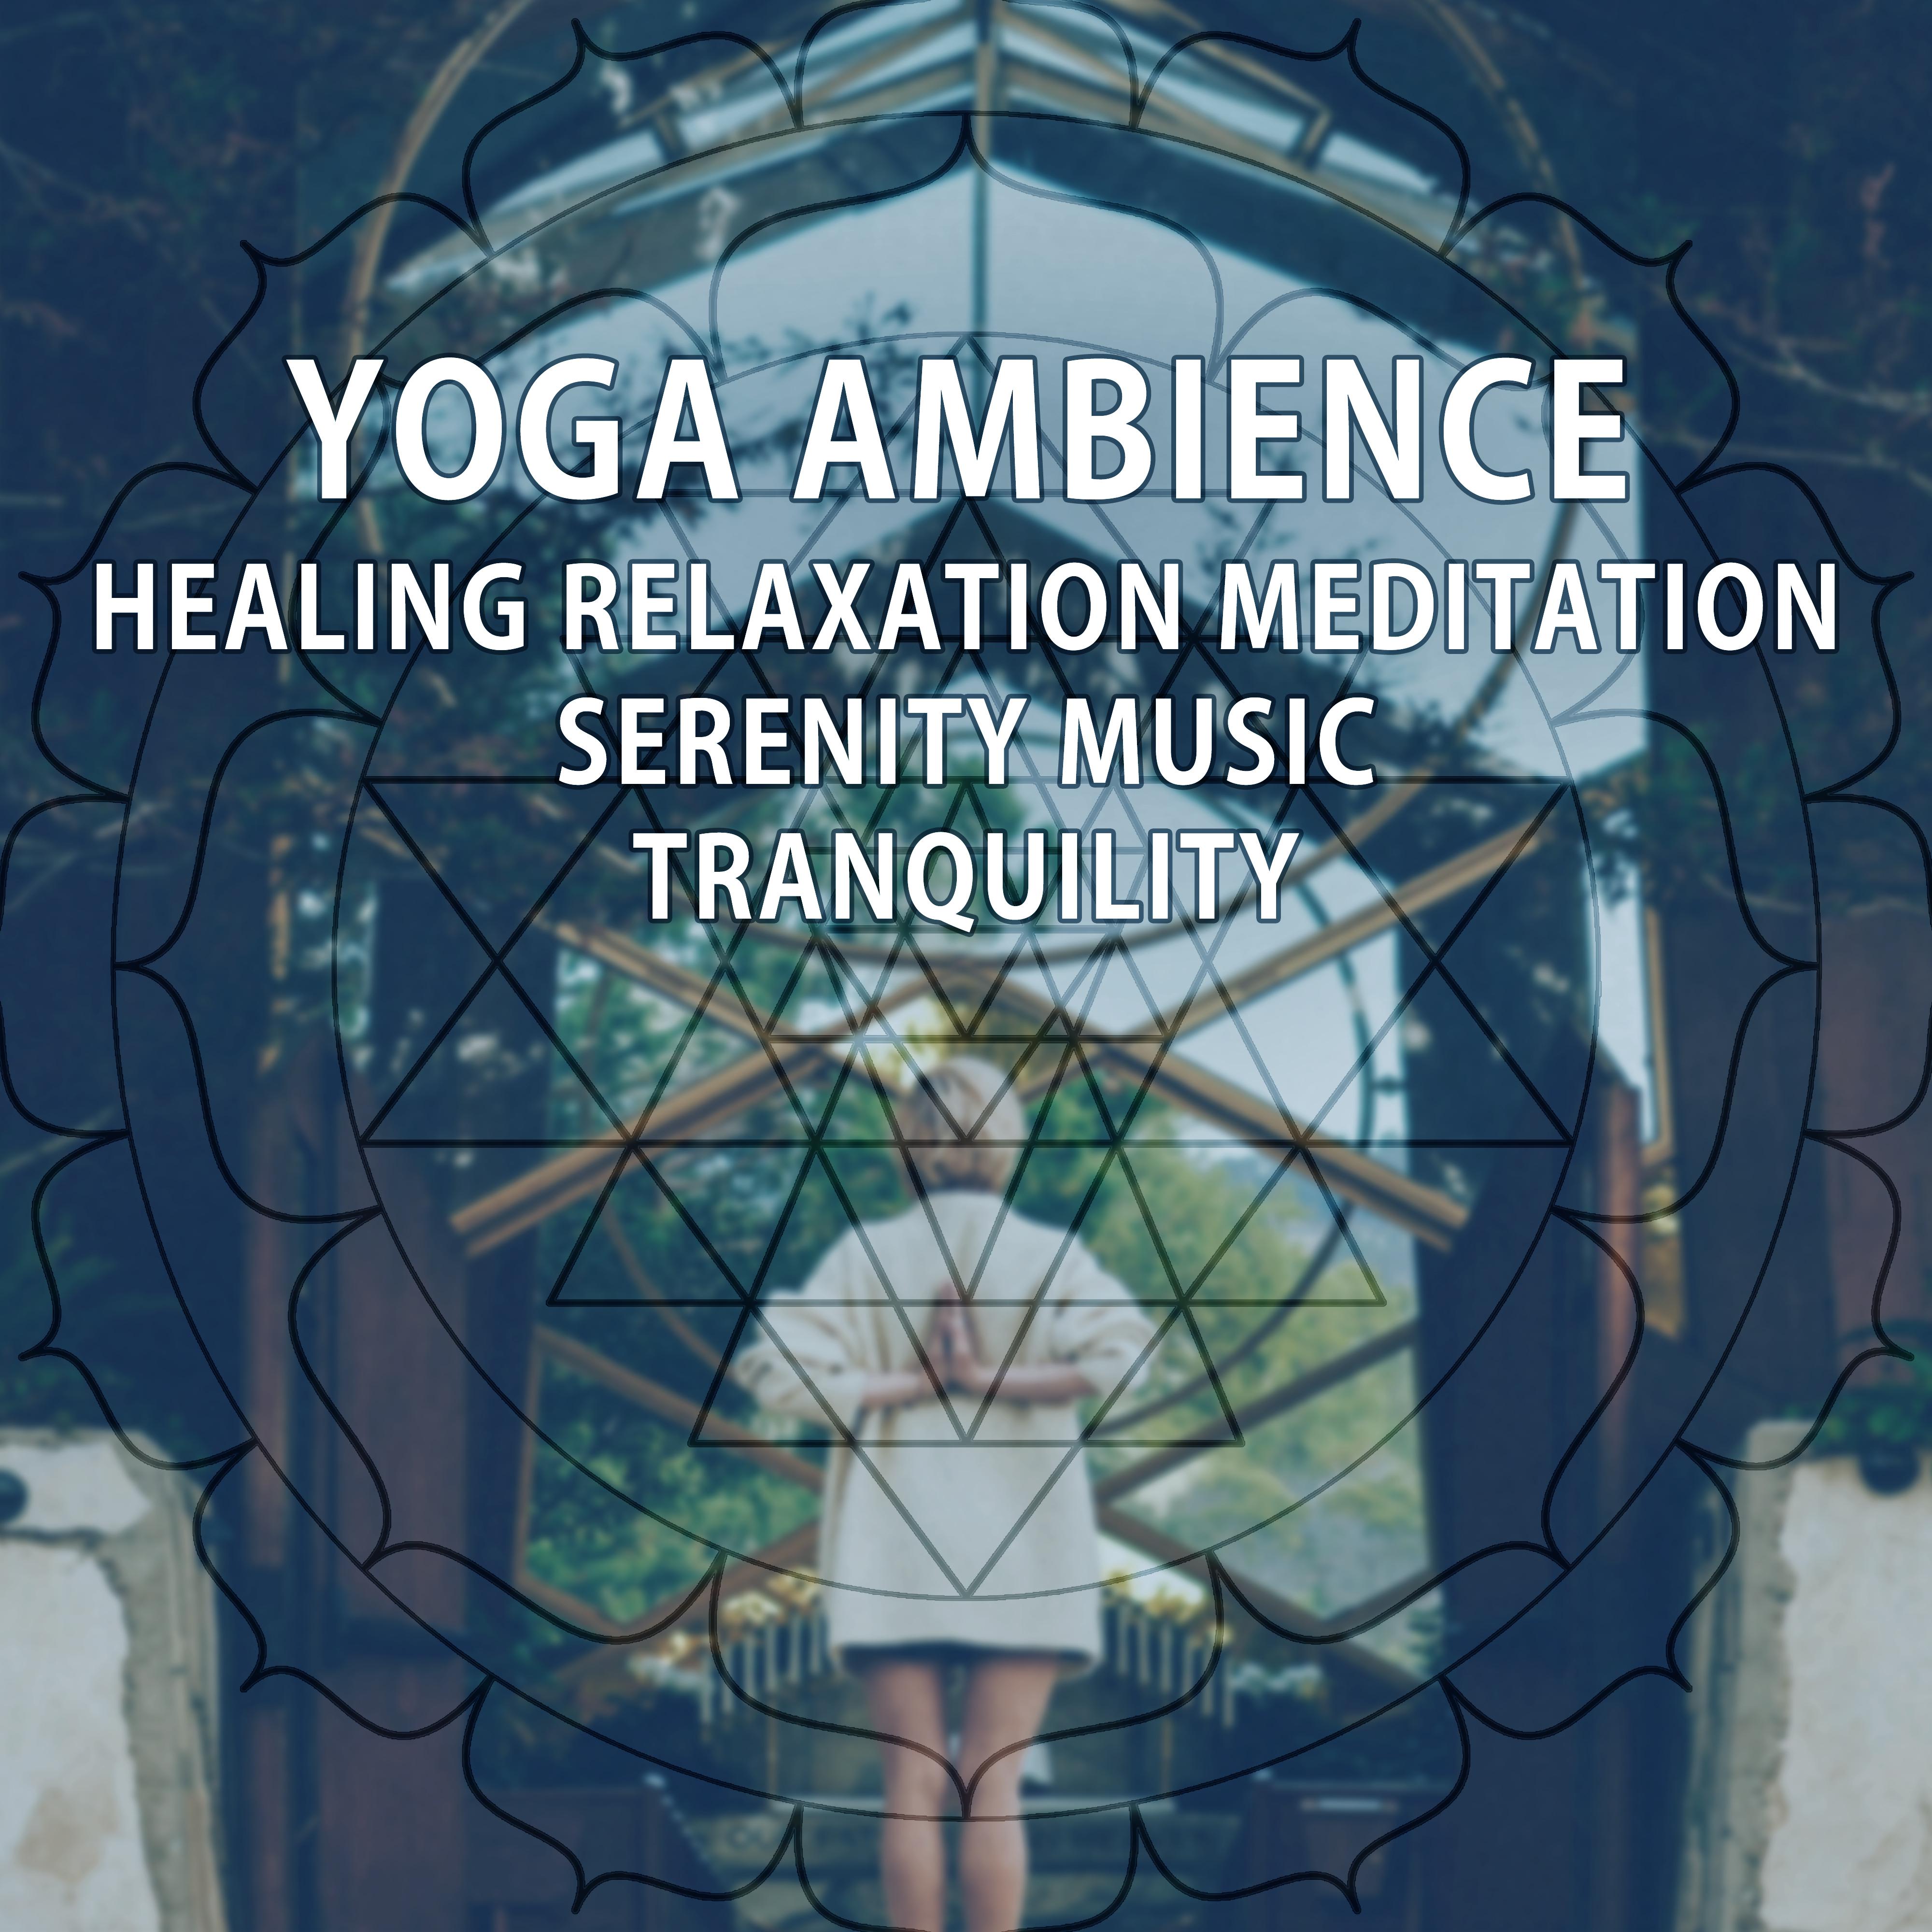 Yoga Ambience – Healing Relaxation Meditation, Serenity Music, Tranquility